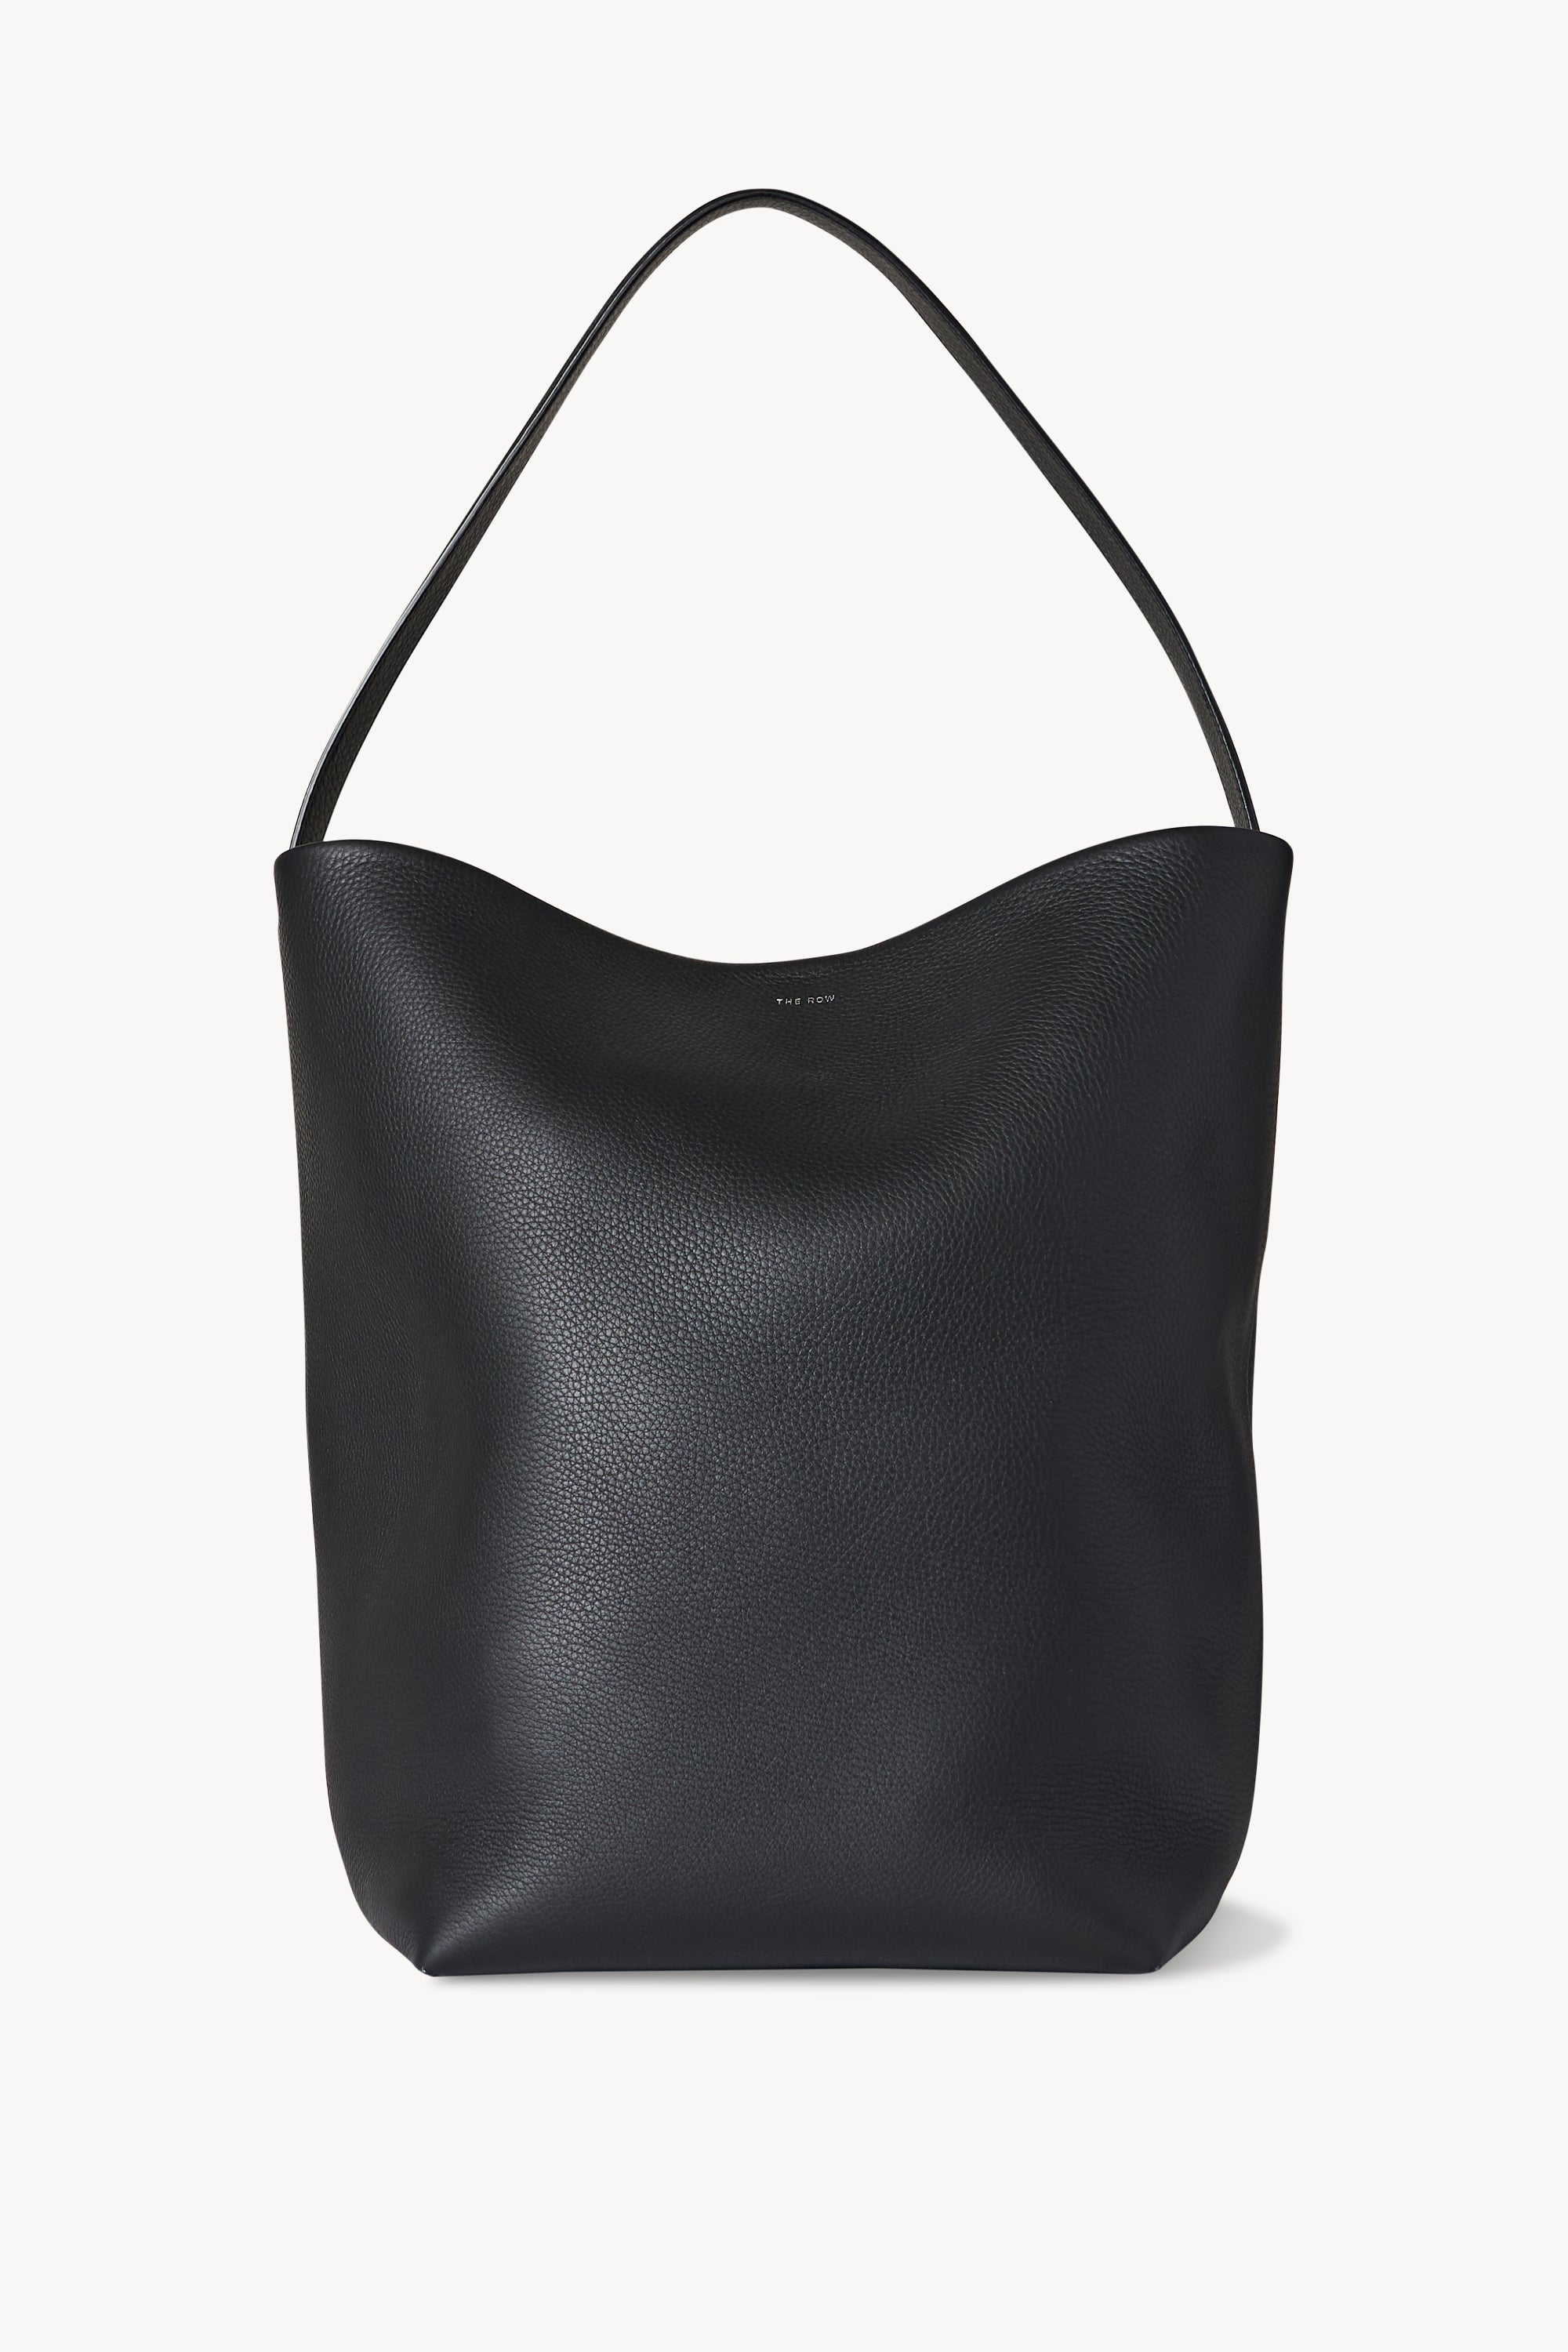 patent leather tote bag